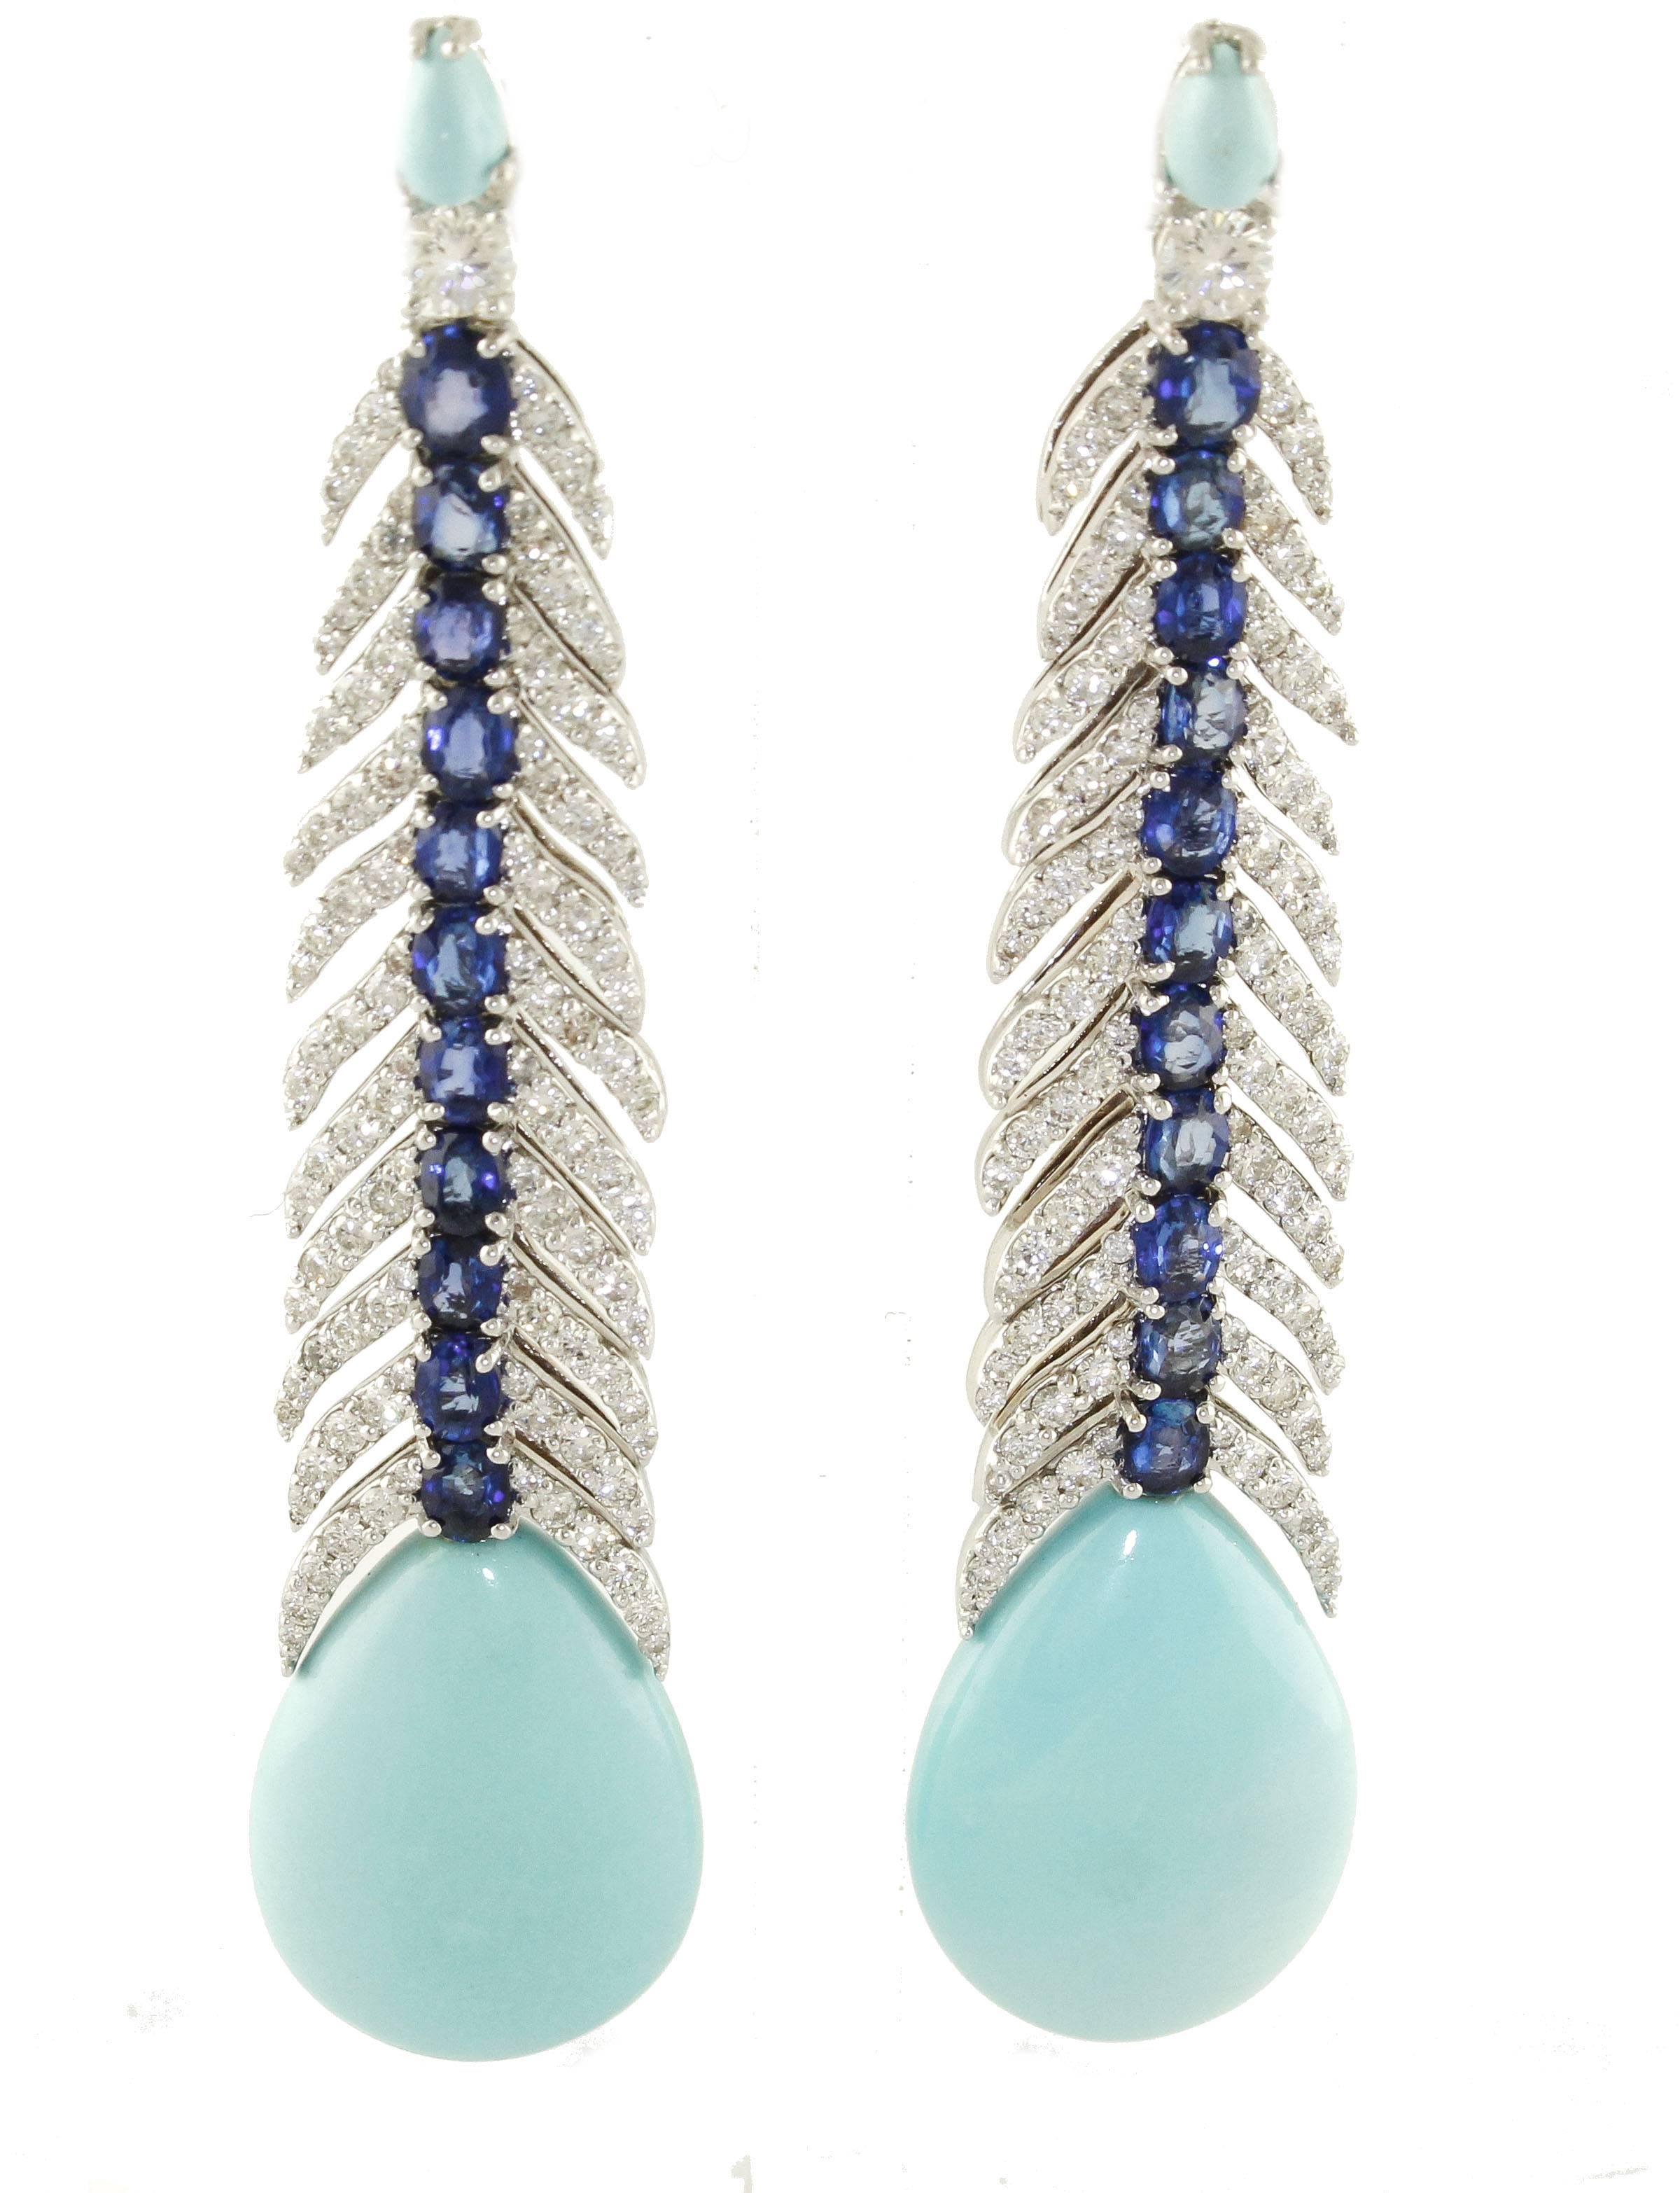 Dangle Earrings in 14Kt of White Gold,  with Diamonds, Sapphires and Turquoise 
Diamonds ct 4.02
Sapphires ct 6.07
Turquoise 7.90 gr
Total Weight 25 gr

R.f. ggoao